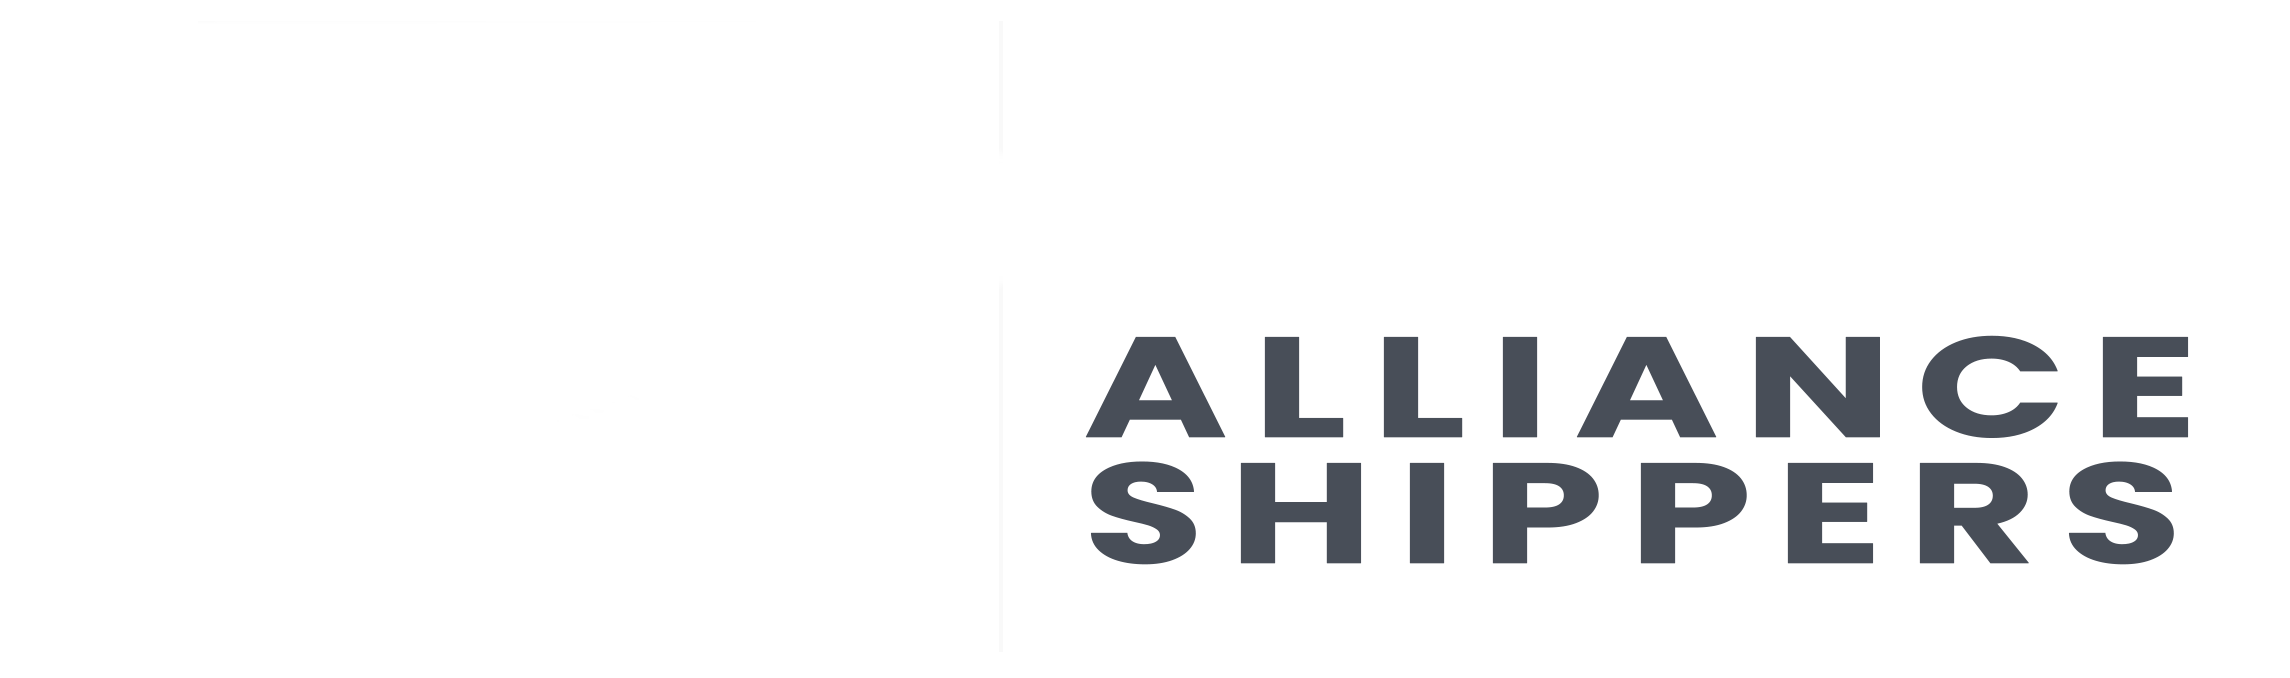 Royal Alliance Shippers